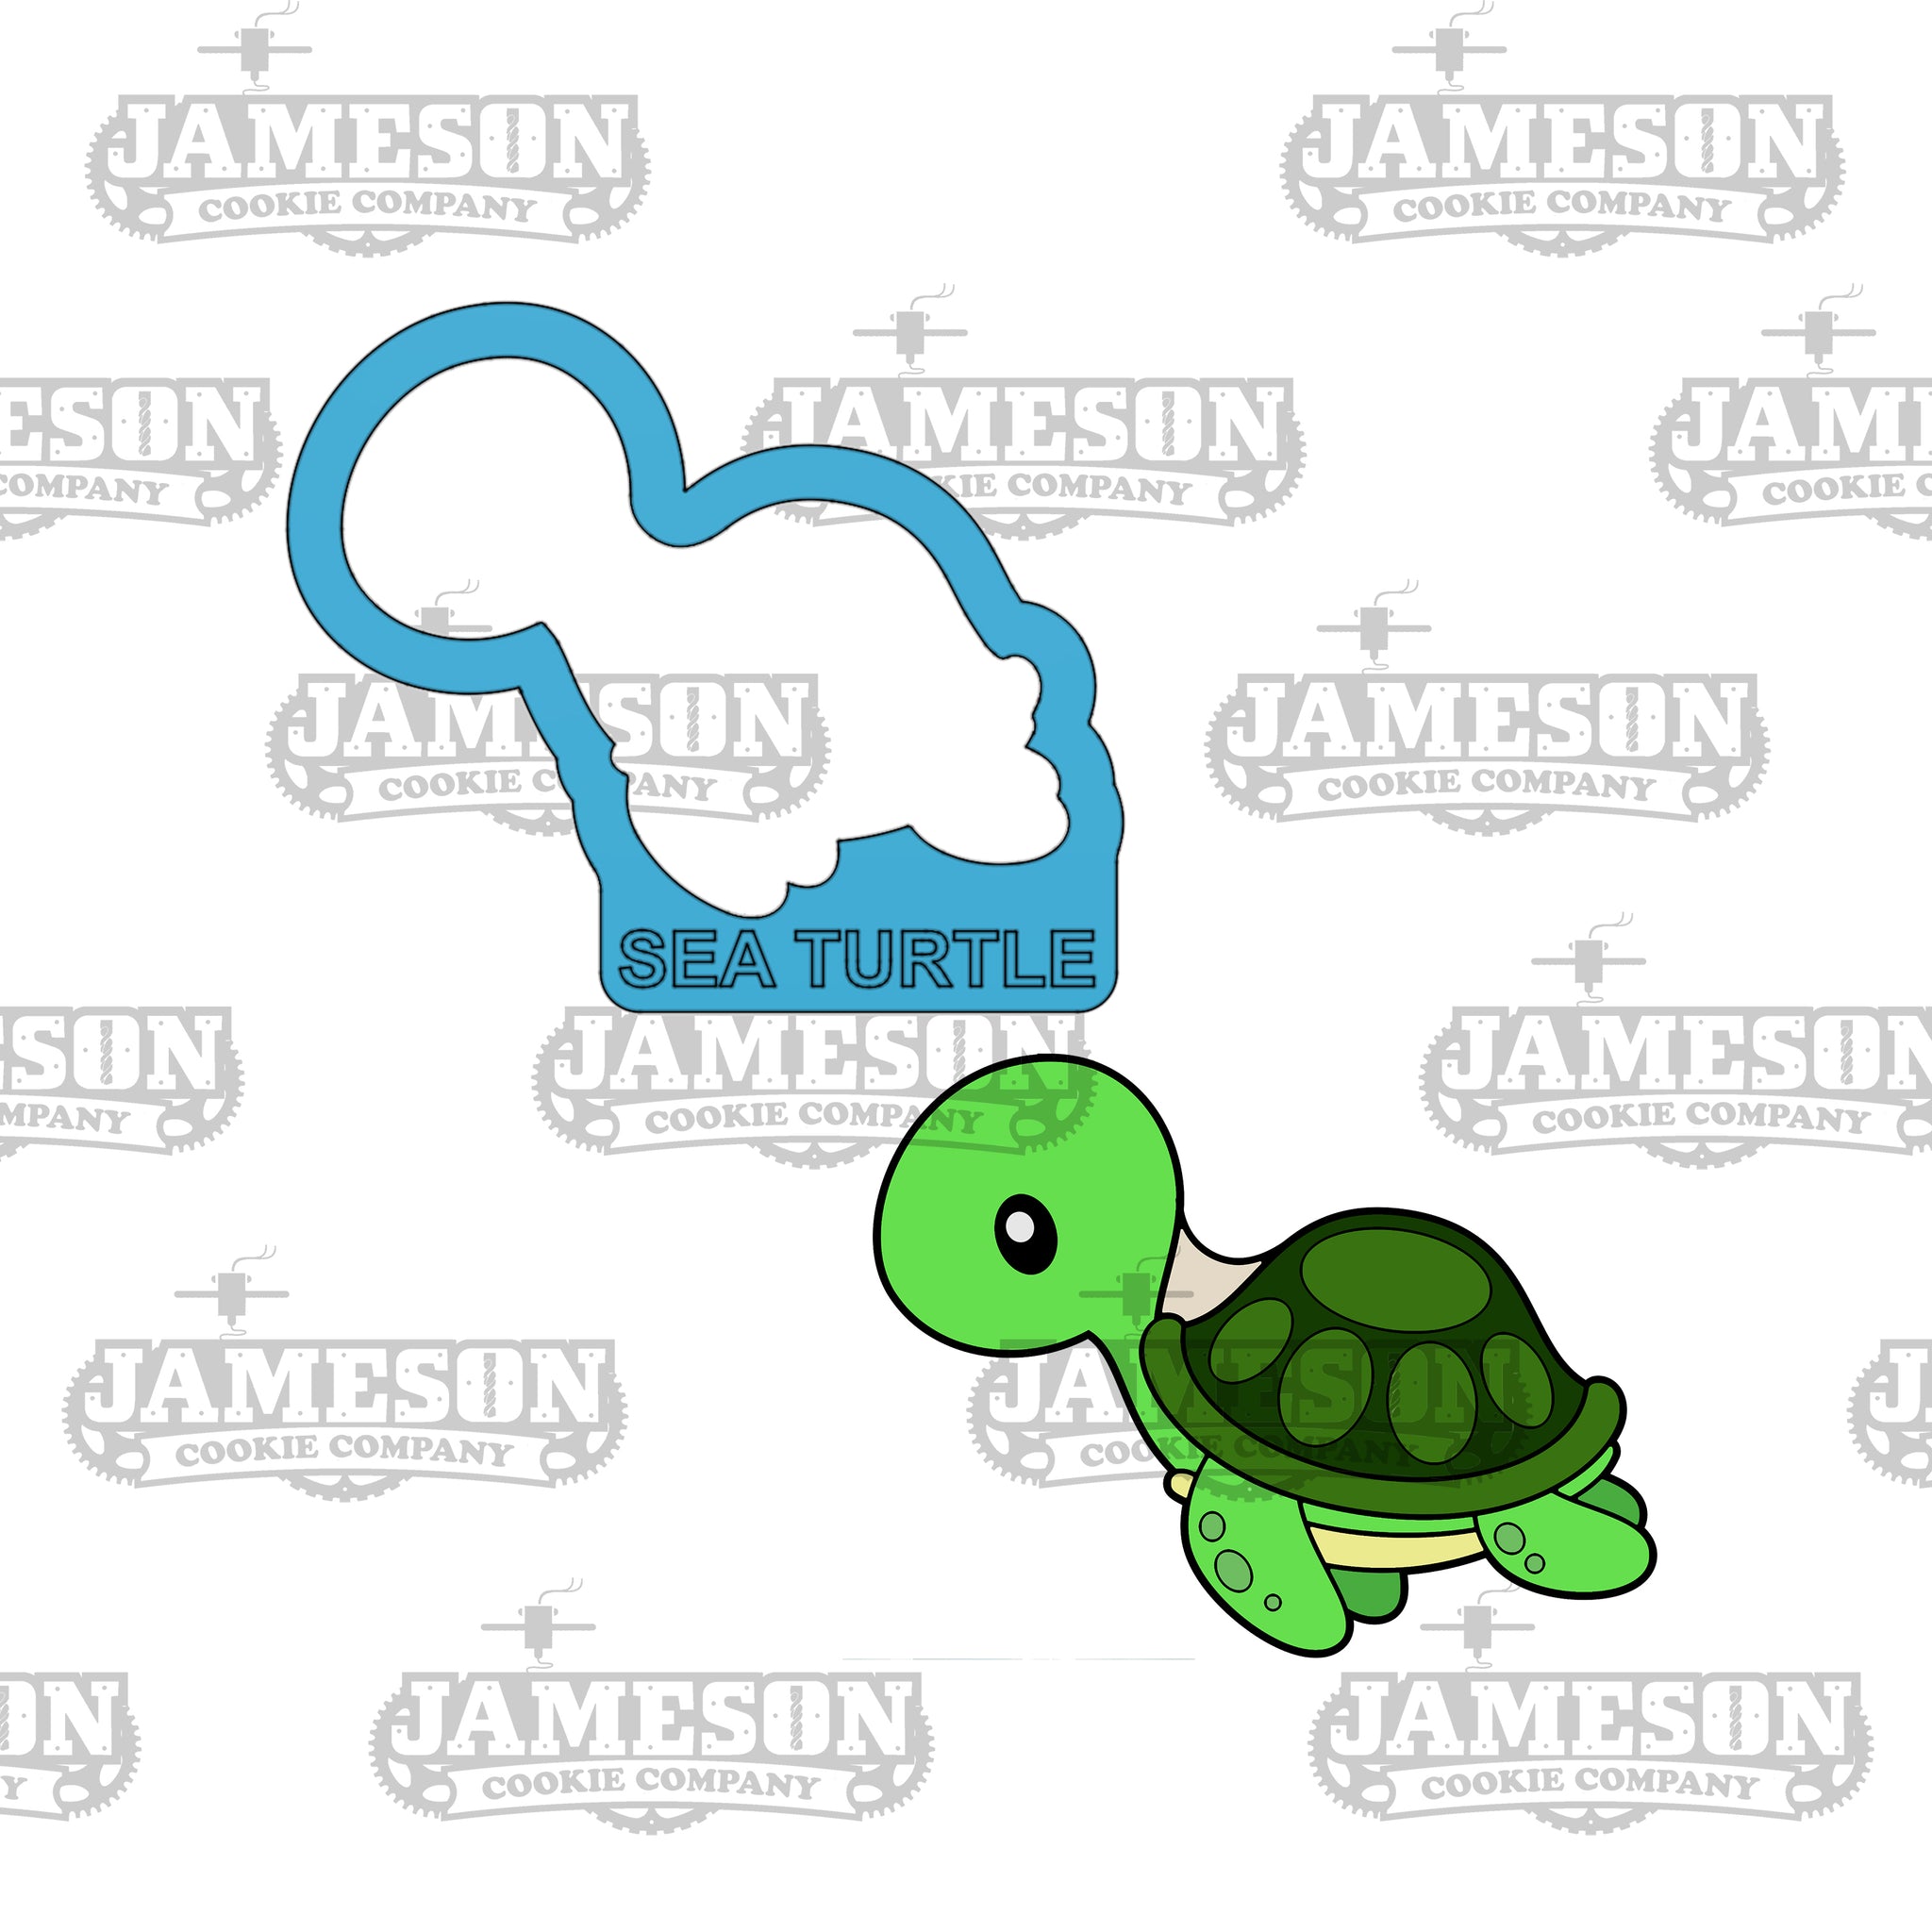 Sea Turtle Cookie Cutter - Under Sea, Ocean, Sea Character Themes